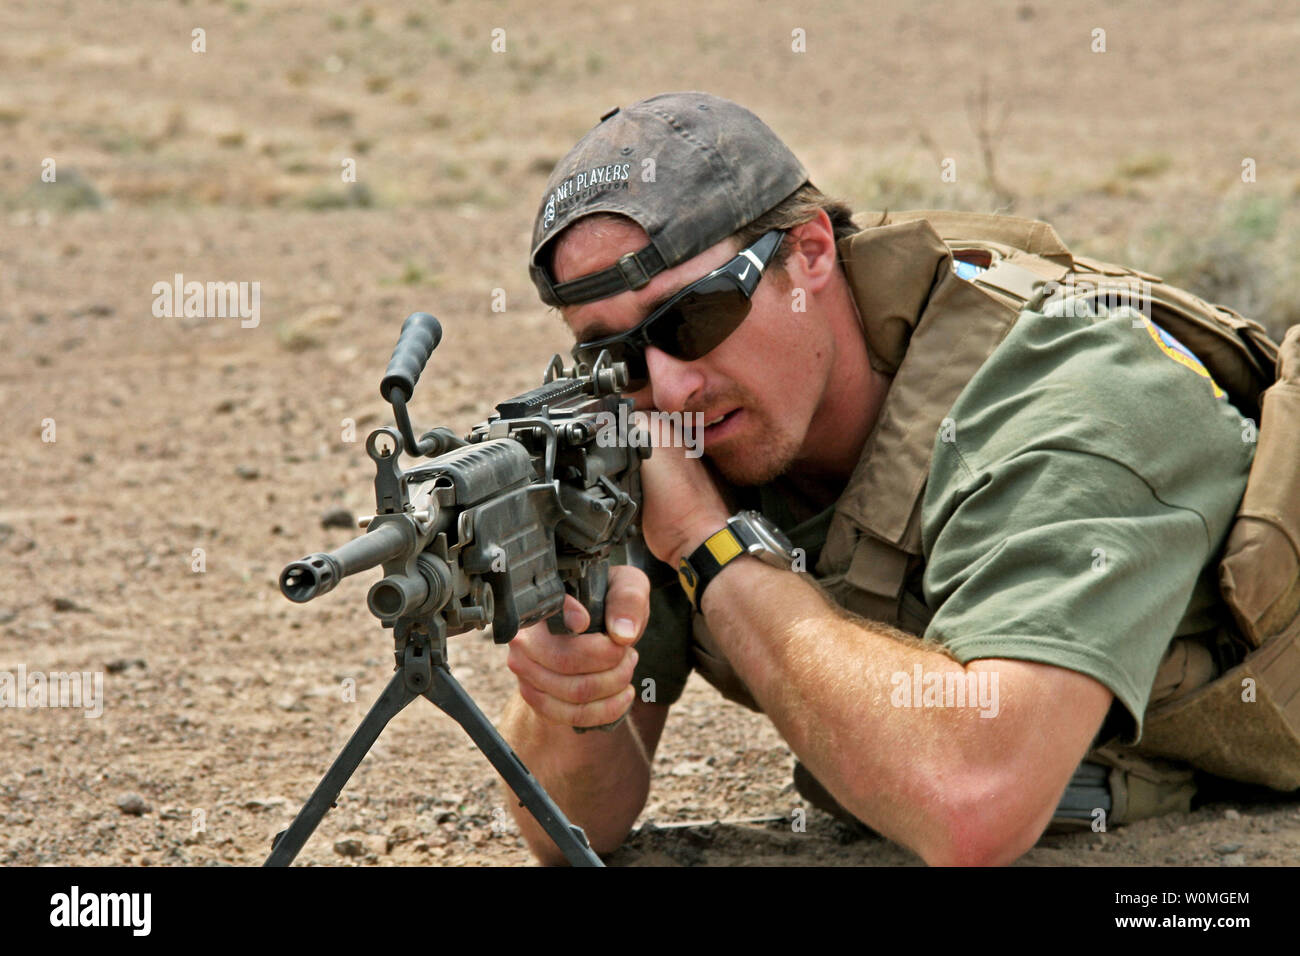 New Orleans Saints quarterback Drew Brees looks through the sights of an M249 Squad Automatic Weapon during a visit to Marines assigned to the 24th Marine Expeditionary Unit (24th MEU) March 29, 2010 in Djibouti during a USO tour. UPI/James Frank/U.S. Navy Stock Photo